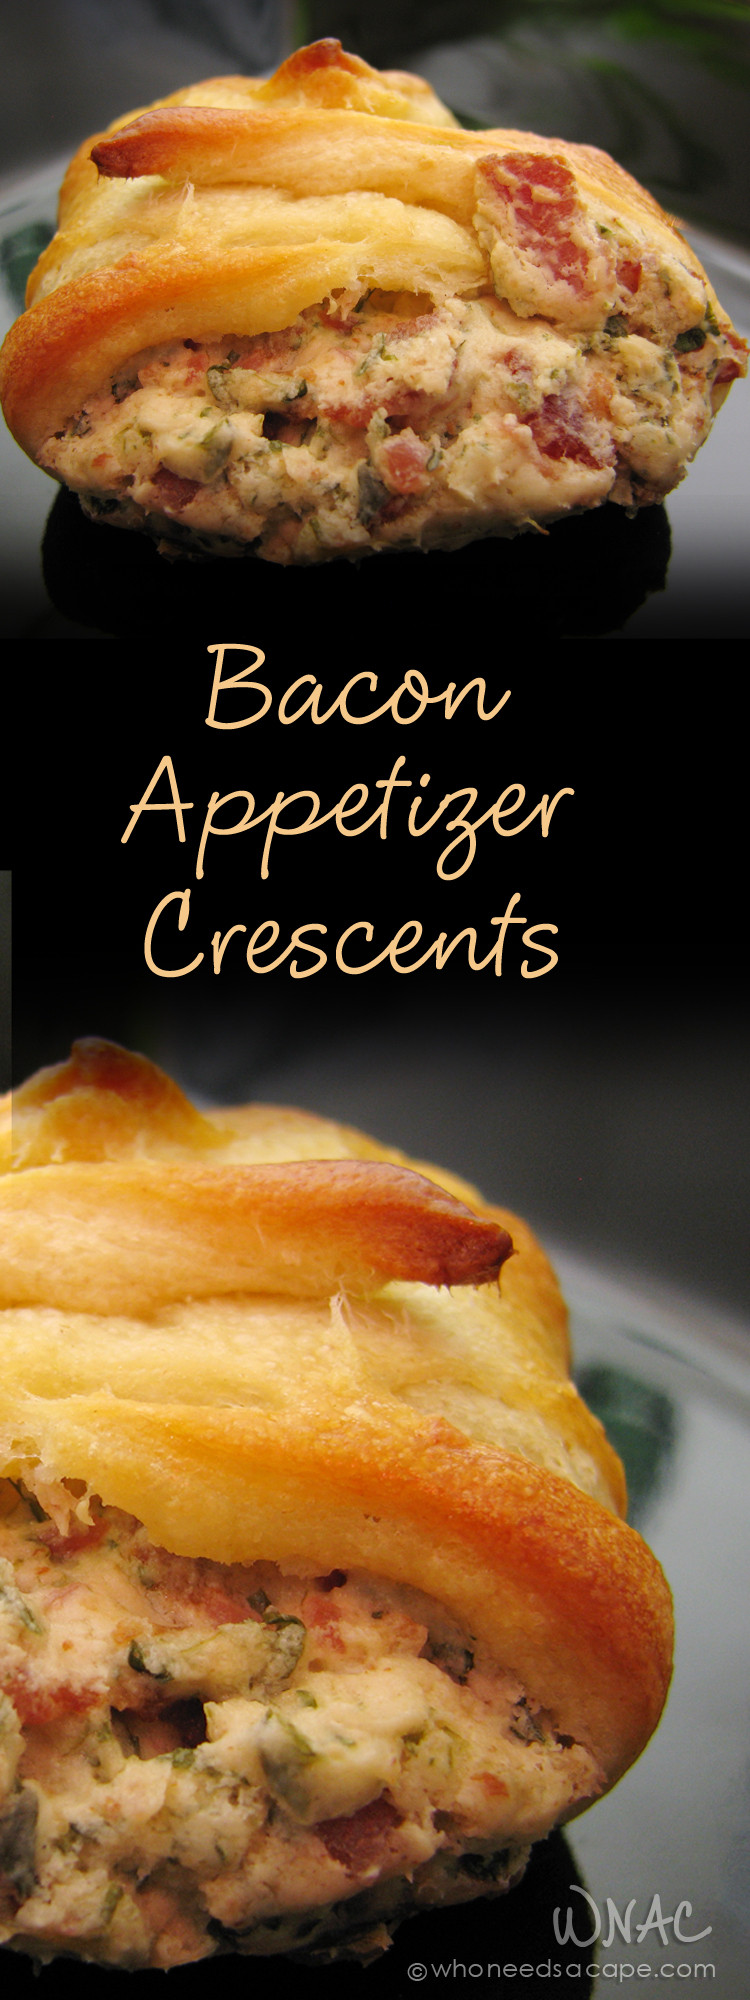 Appetizers Using Crescent Rolls
 Bacon Appetizer Crescents